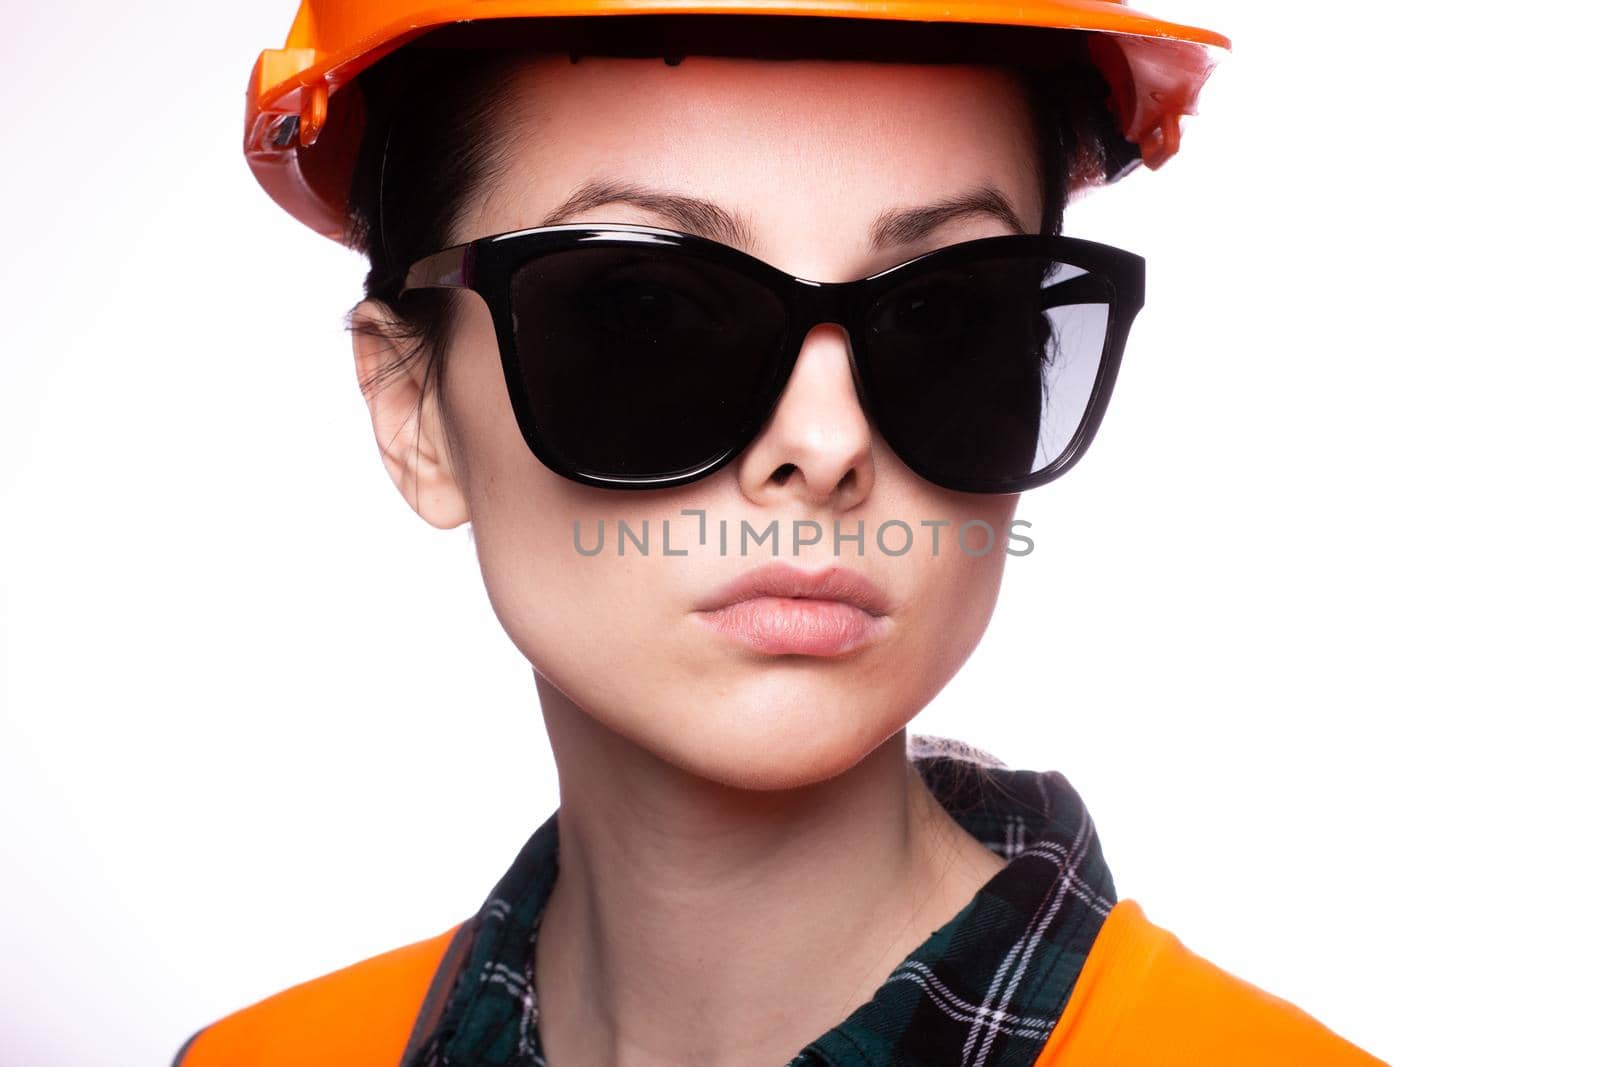 woman in sunglasses construction safety helmet and orange vest, close-up portrait. High quality photo